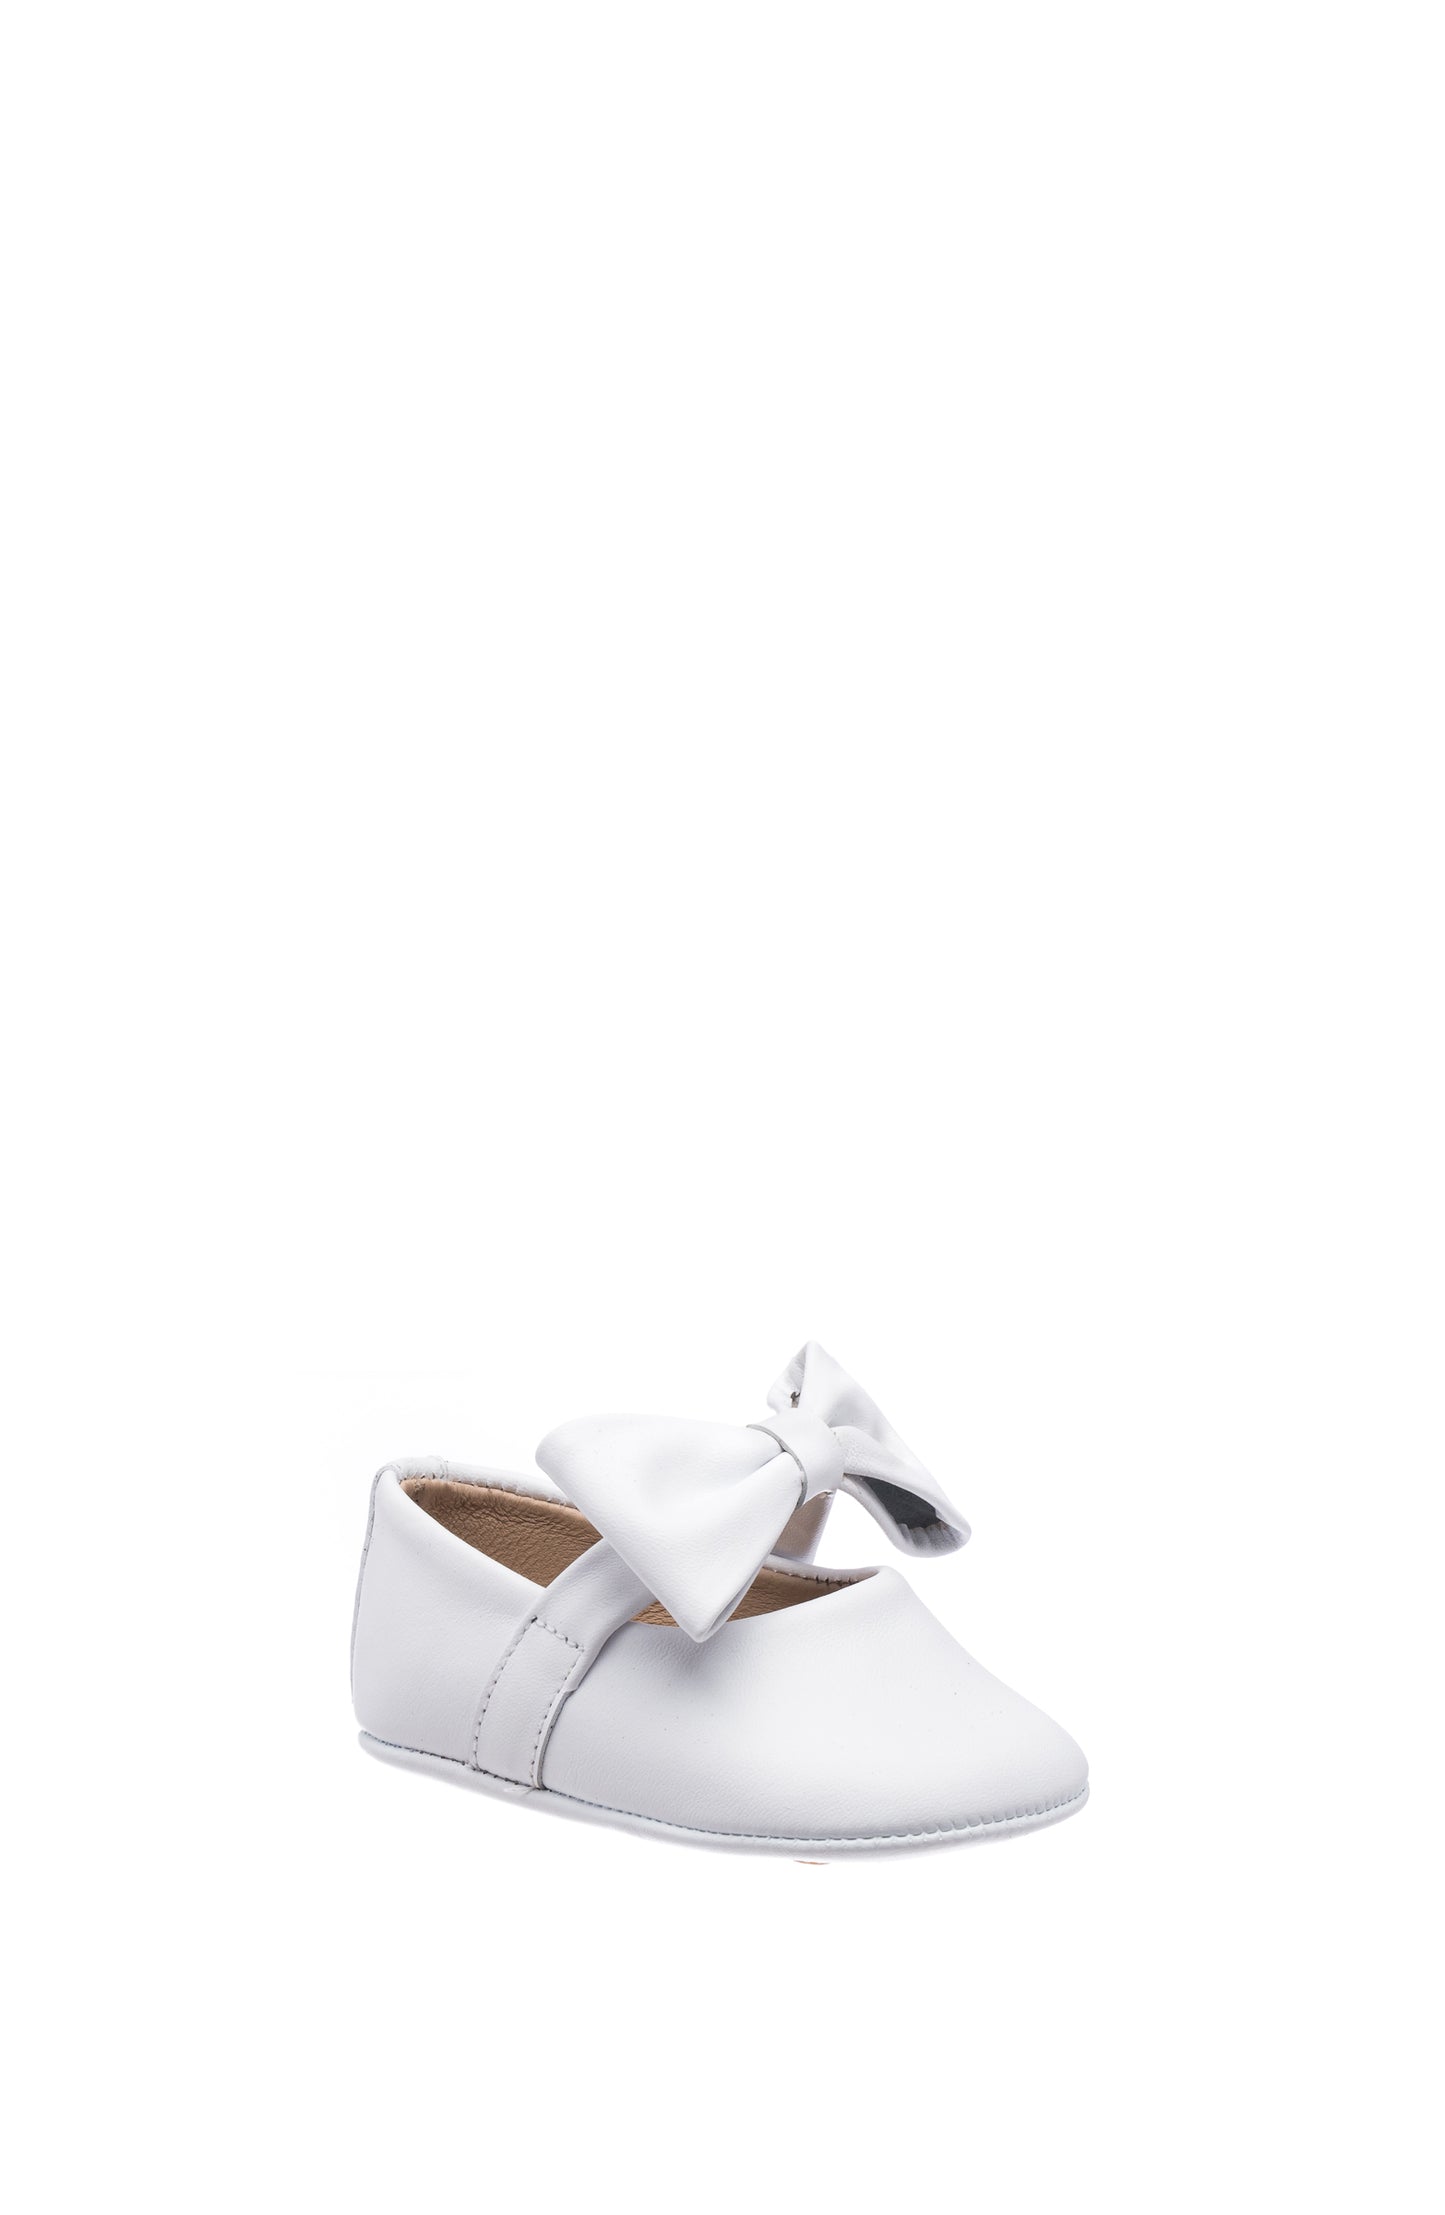 Baby Ballerina with Bow White